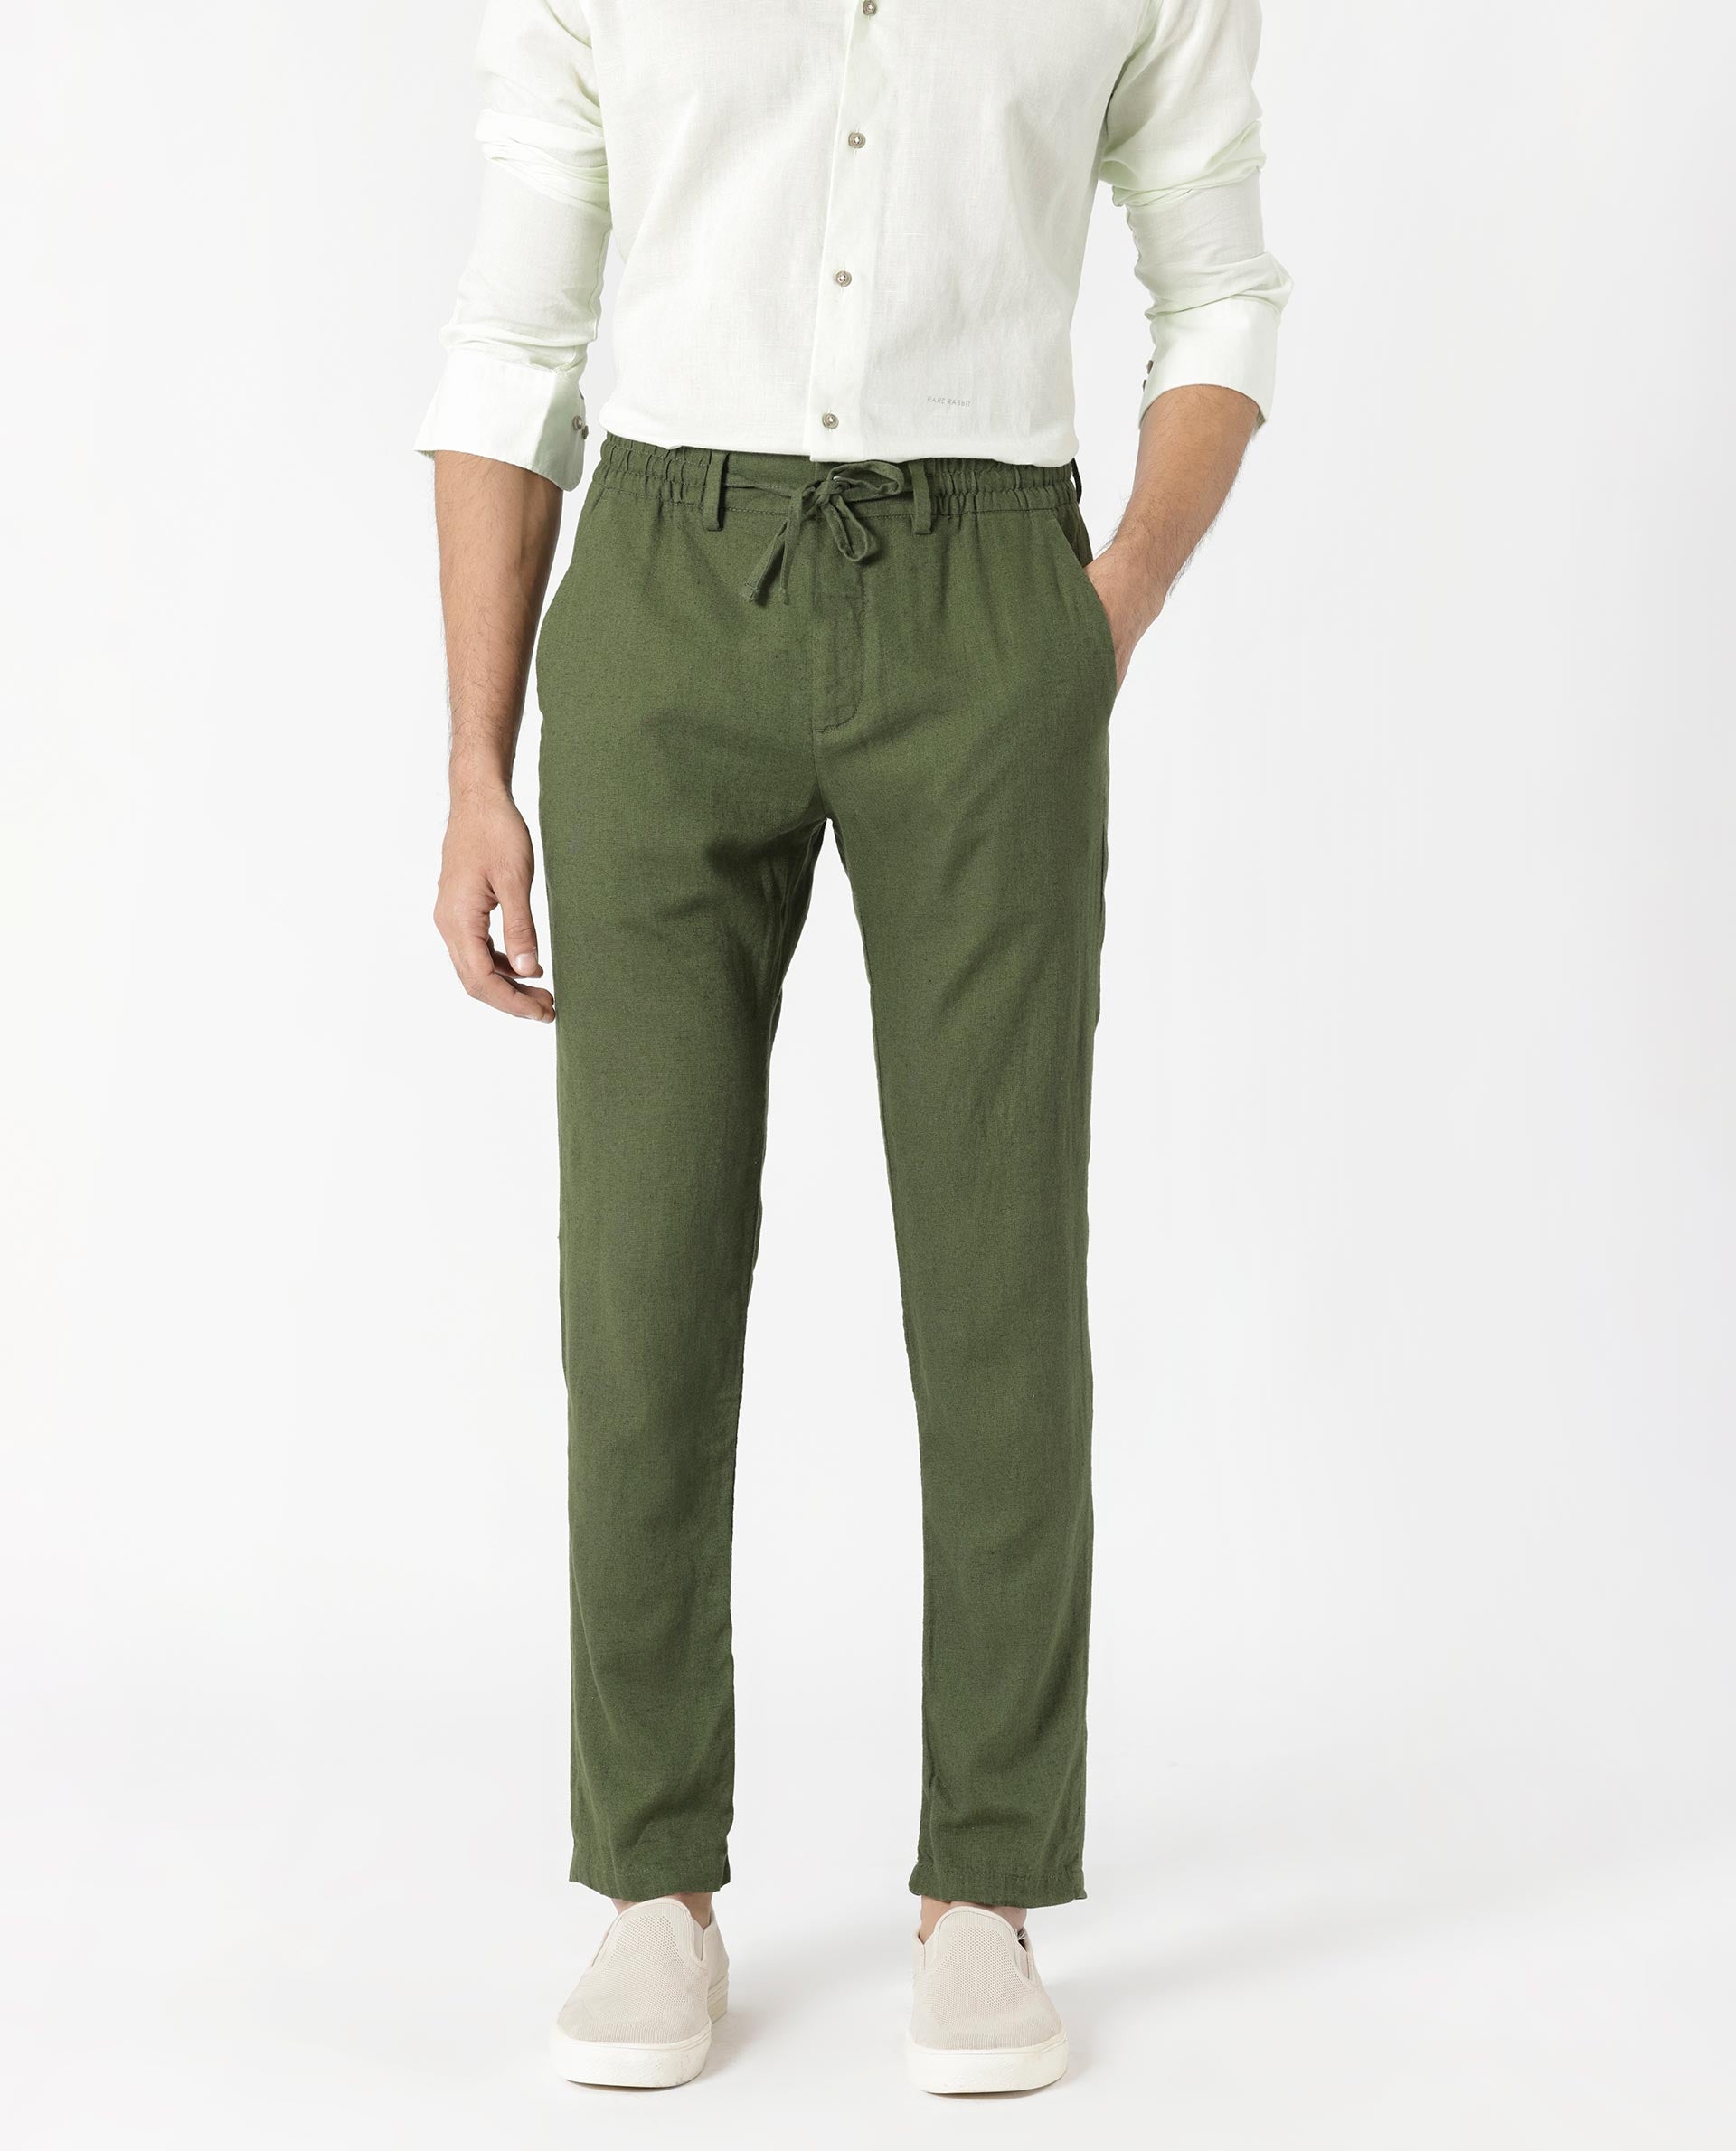 Urbano Fashion Slim Fit Men Green Trousers - Buy Olive Green Urbano Fashion  Slim Fit Men Green Trousers Online at Best Prices in India | Flipkart.com